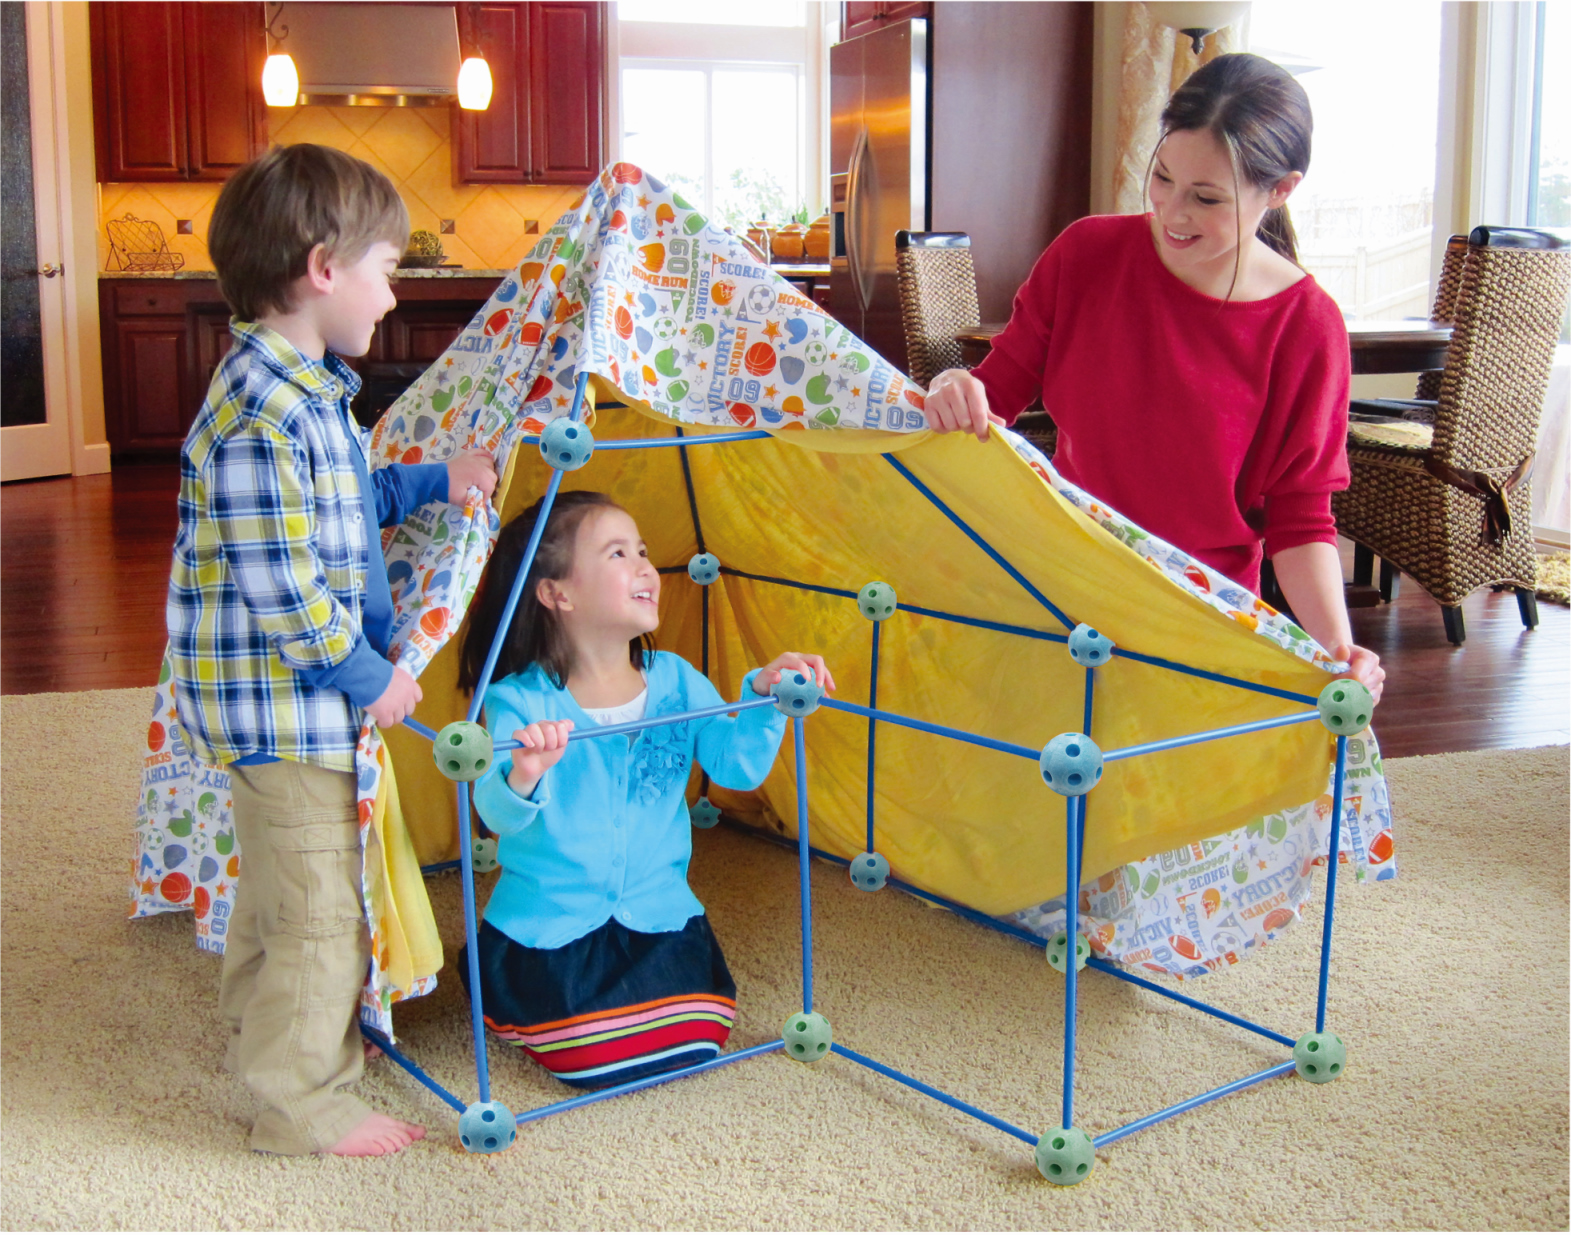 Build Your Own Den Kids Construction Building Toy-120 Pieces, Shop Today.  Get it Tomorrow!